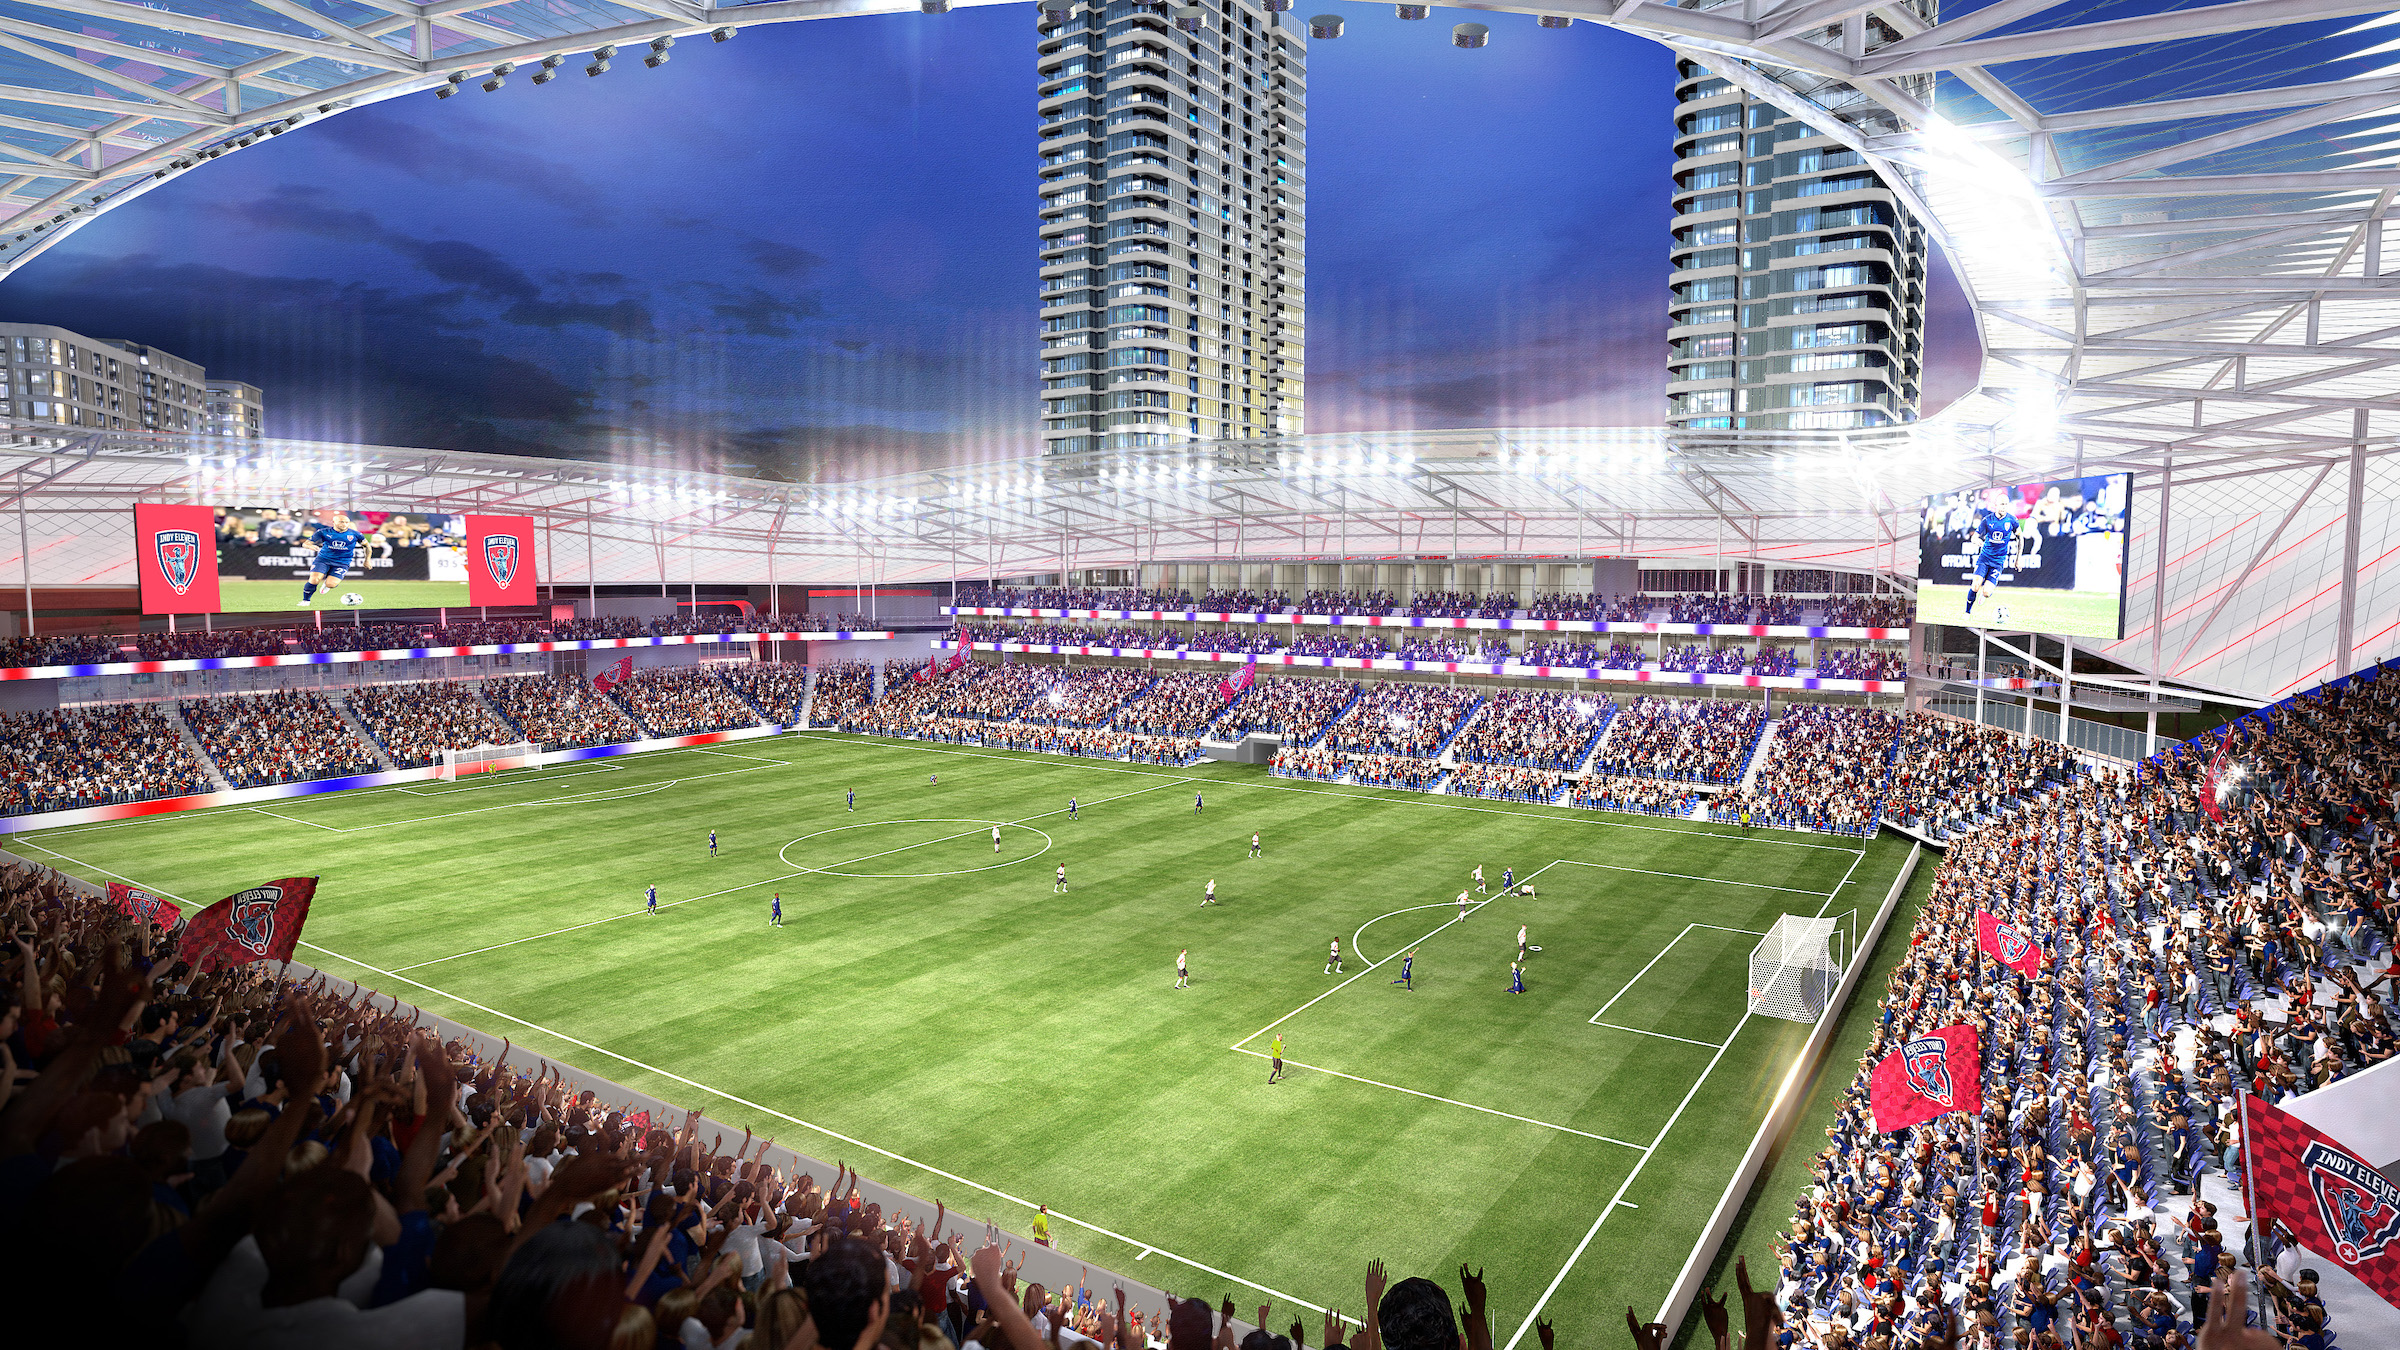 Eleven Park soccer stadium Indianapolis, Indy Eleven, Keystone Group, Populous _Bowl